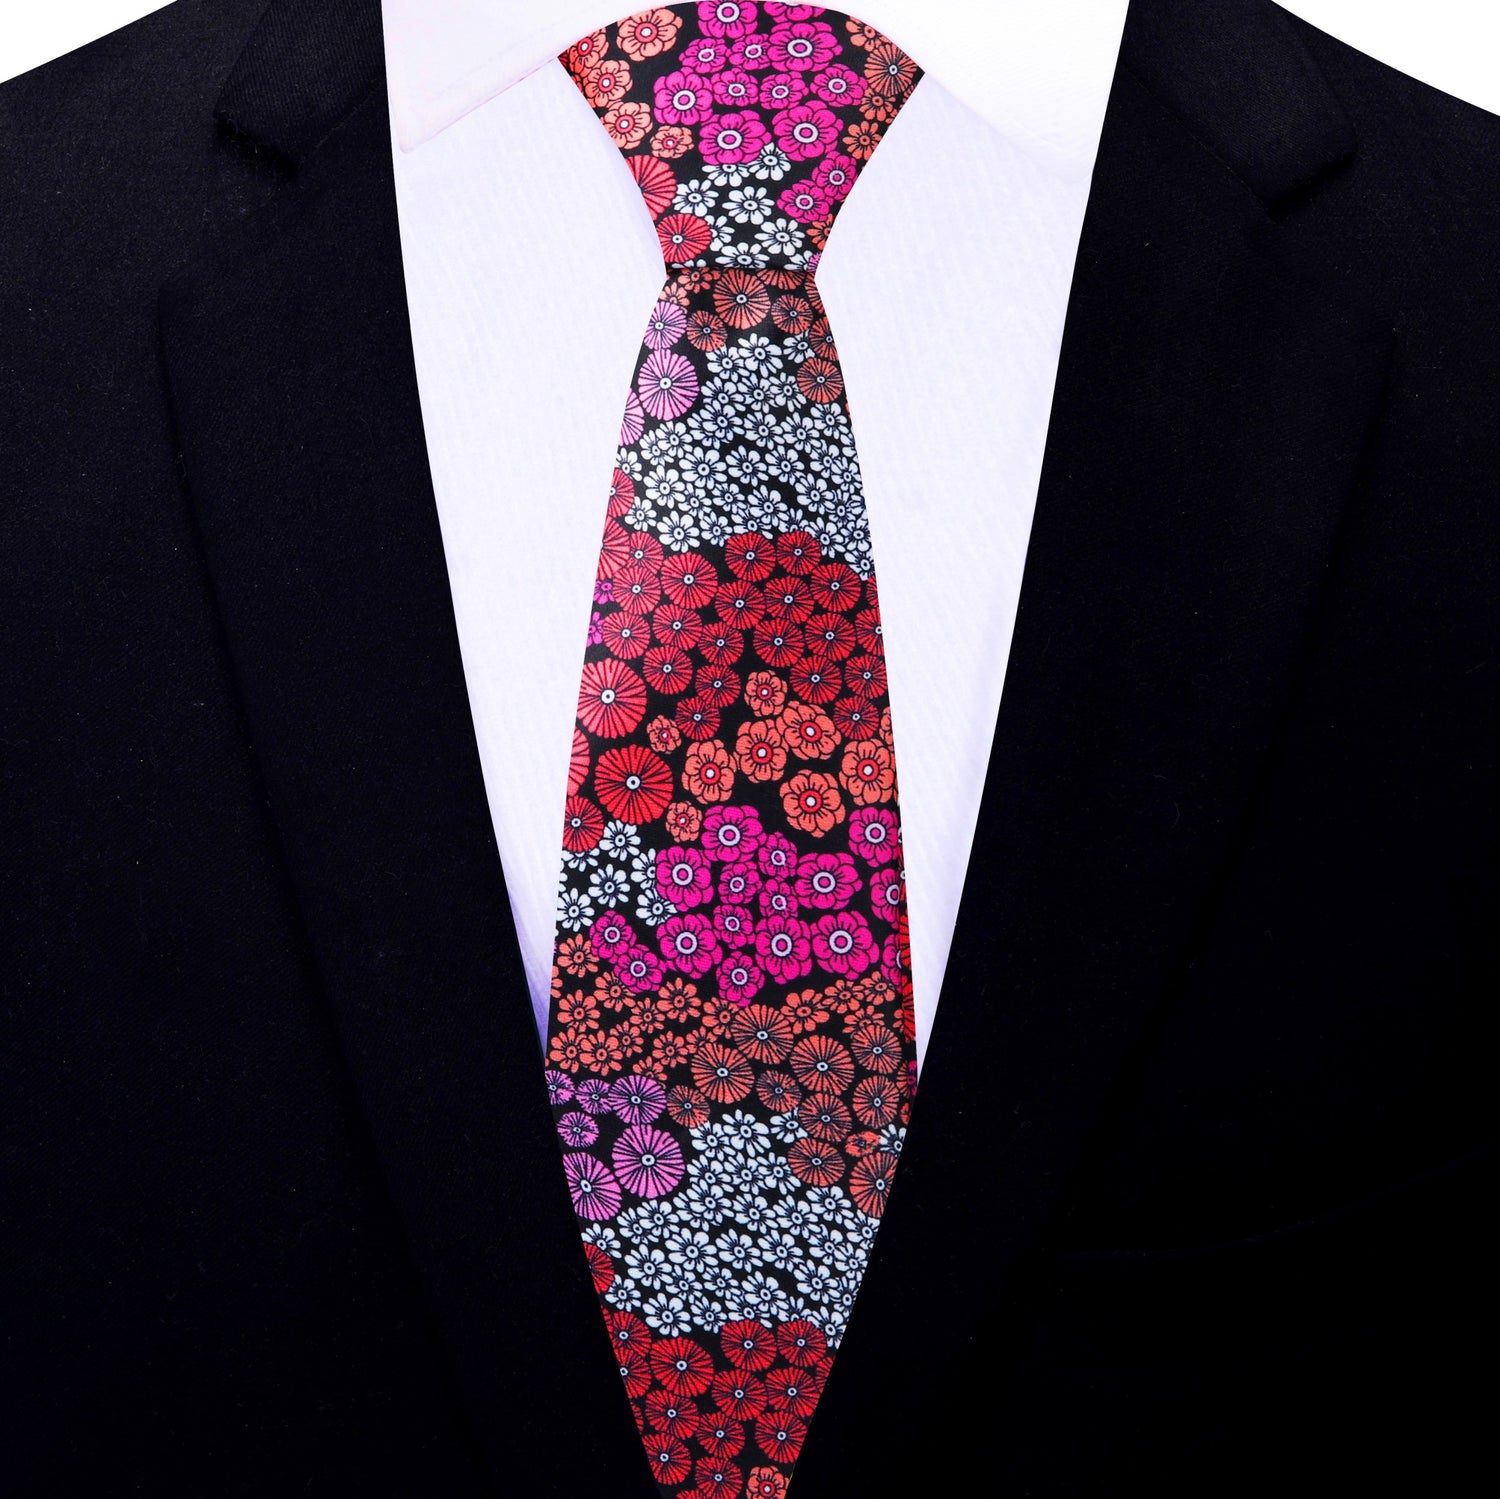 Thin Tie: Red Pink Orange and White Mixed Flowers Tie